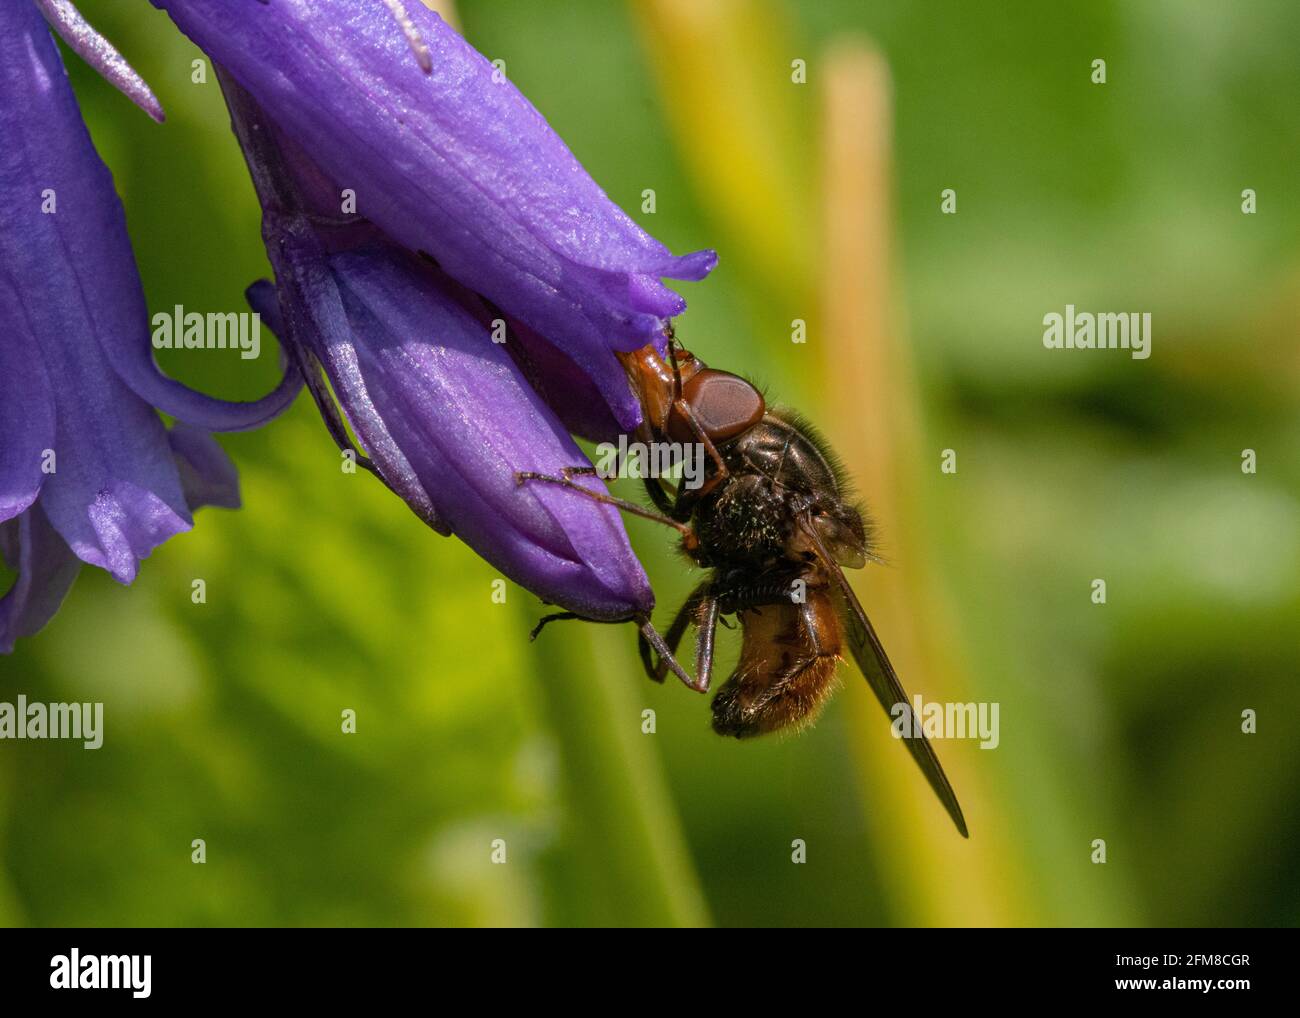 Close up Detail of a Snouted Hoverfly (Genus Rhingia) Using its Long ‘Snout’ to feed from a Single Bluebell Flower Head (Hyacinthoides non-scripta). Stock Photo